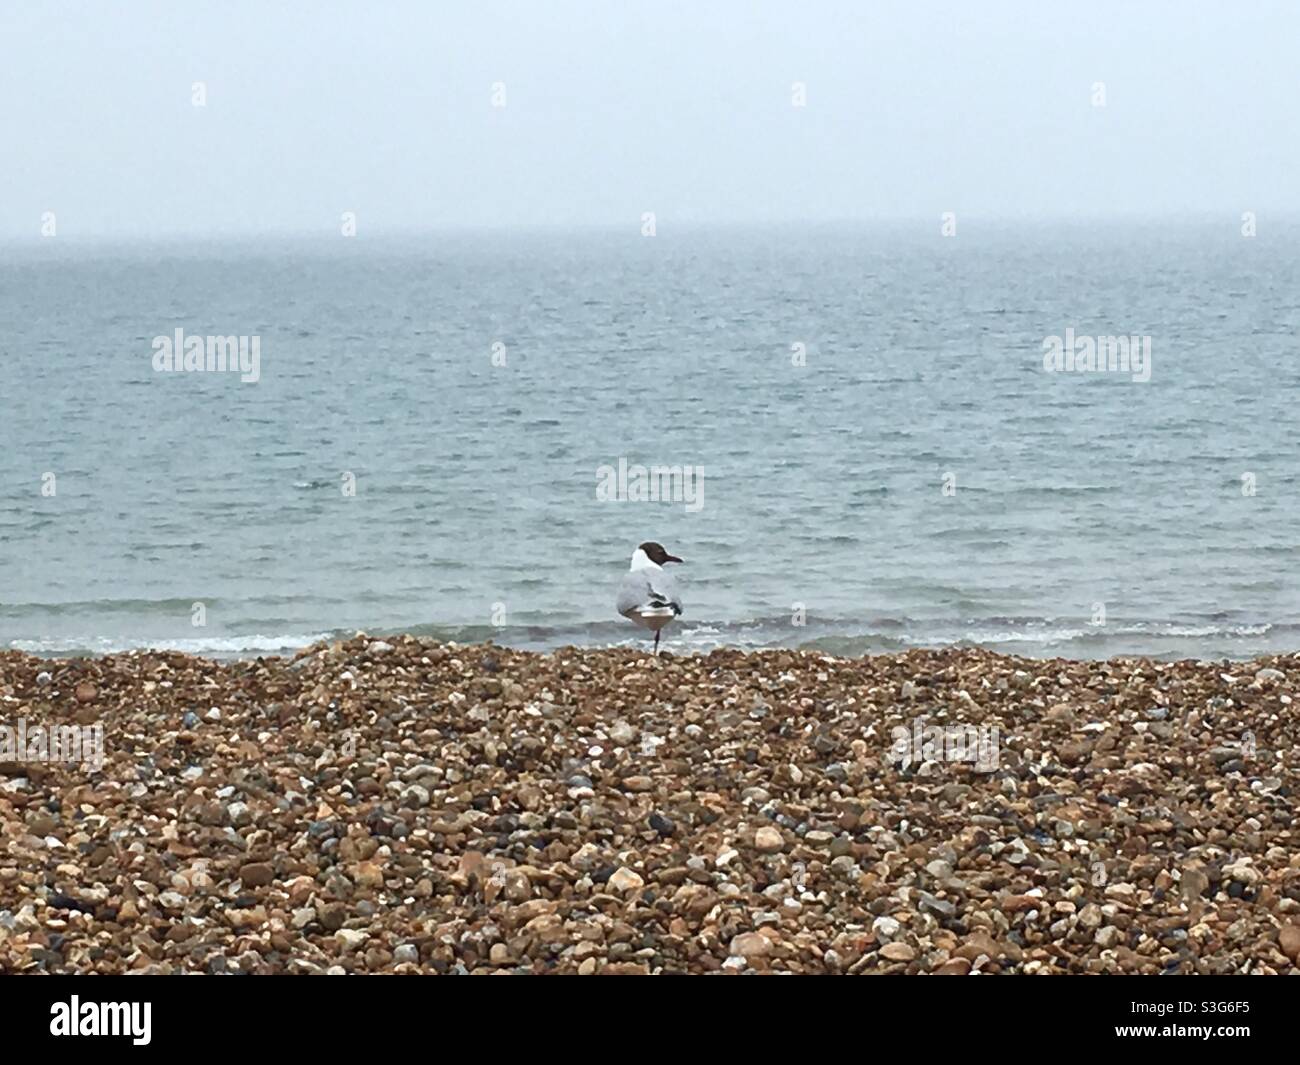 Seagull standing on one leg on pebbly beach Stock Photo